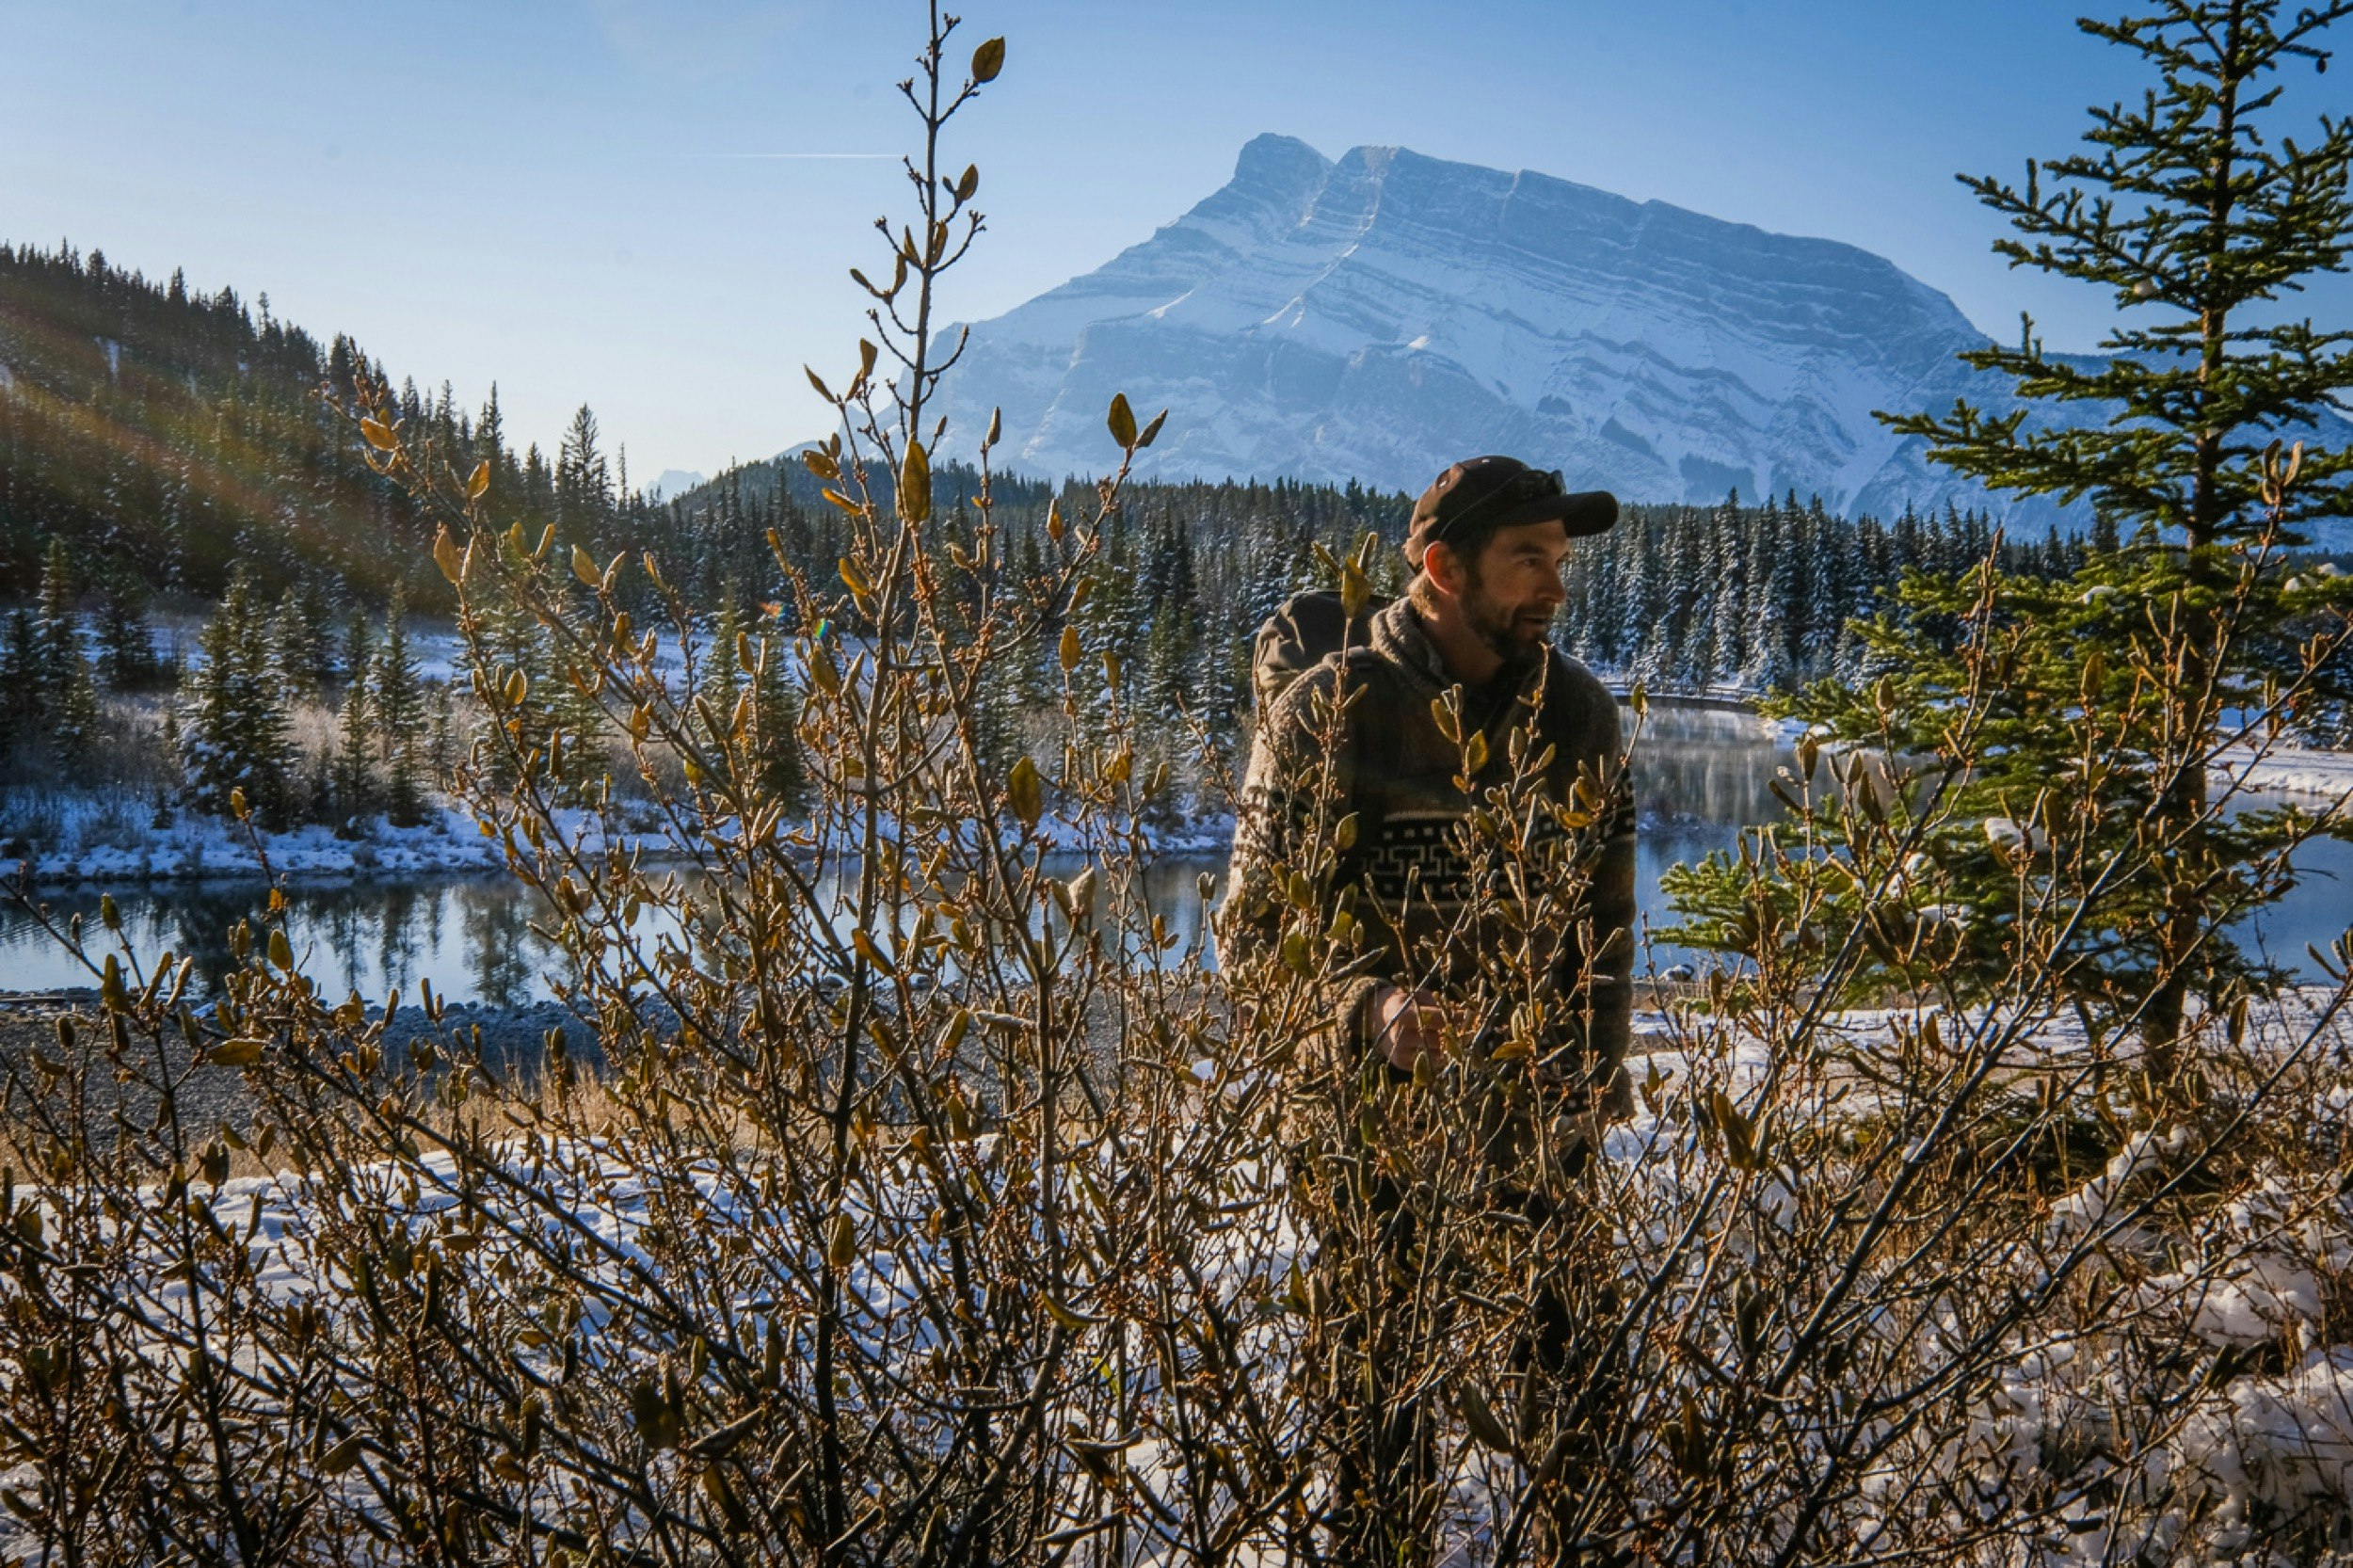 A man explores Cascade Park surrounded by medicinal plants during winter at Banff and Lake Louise